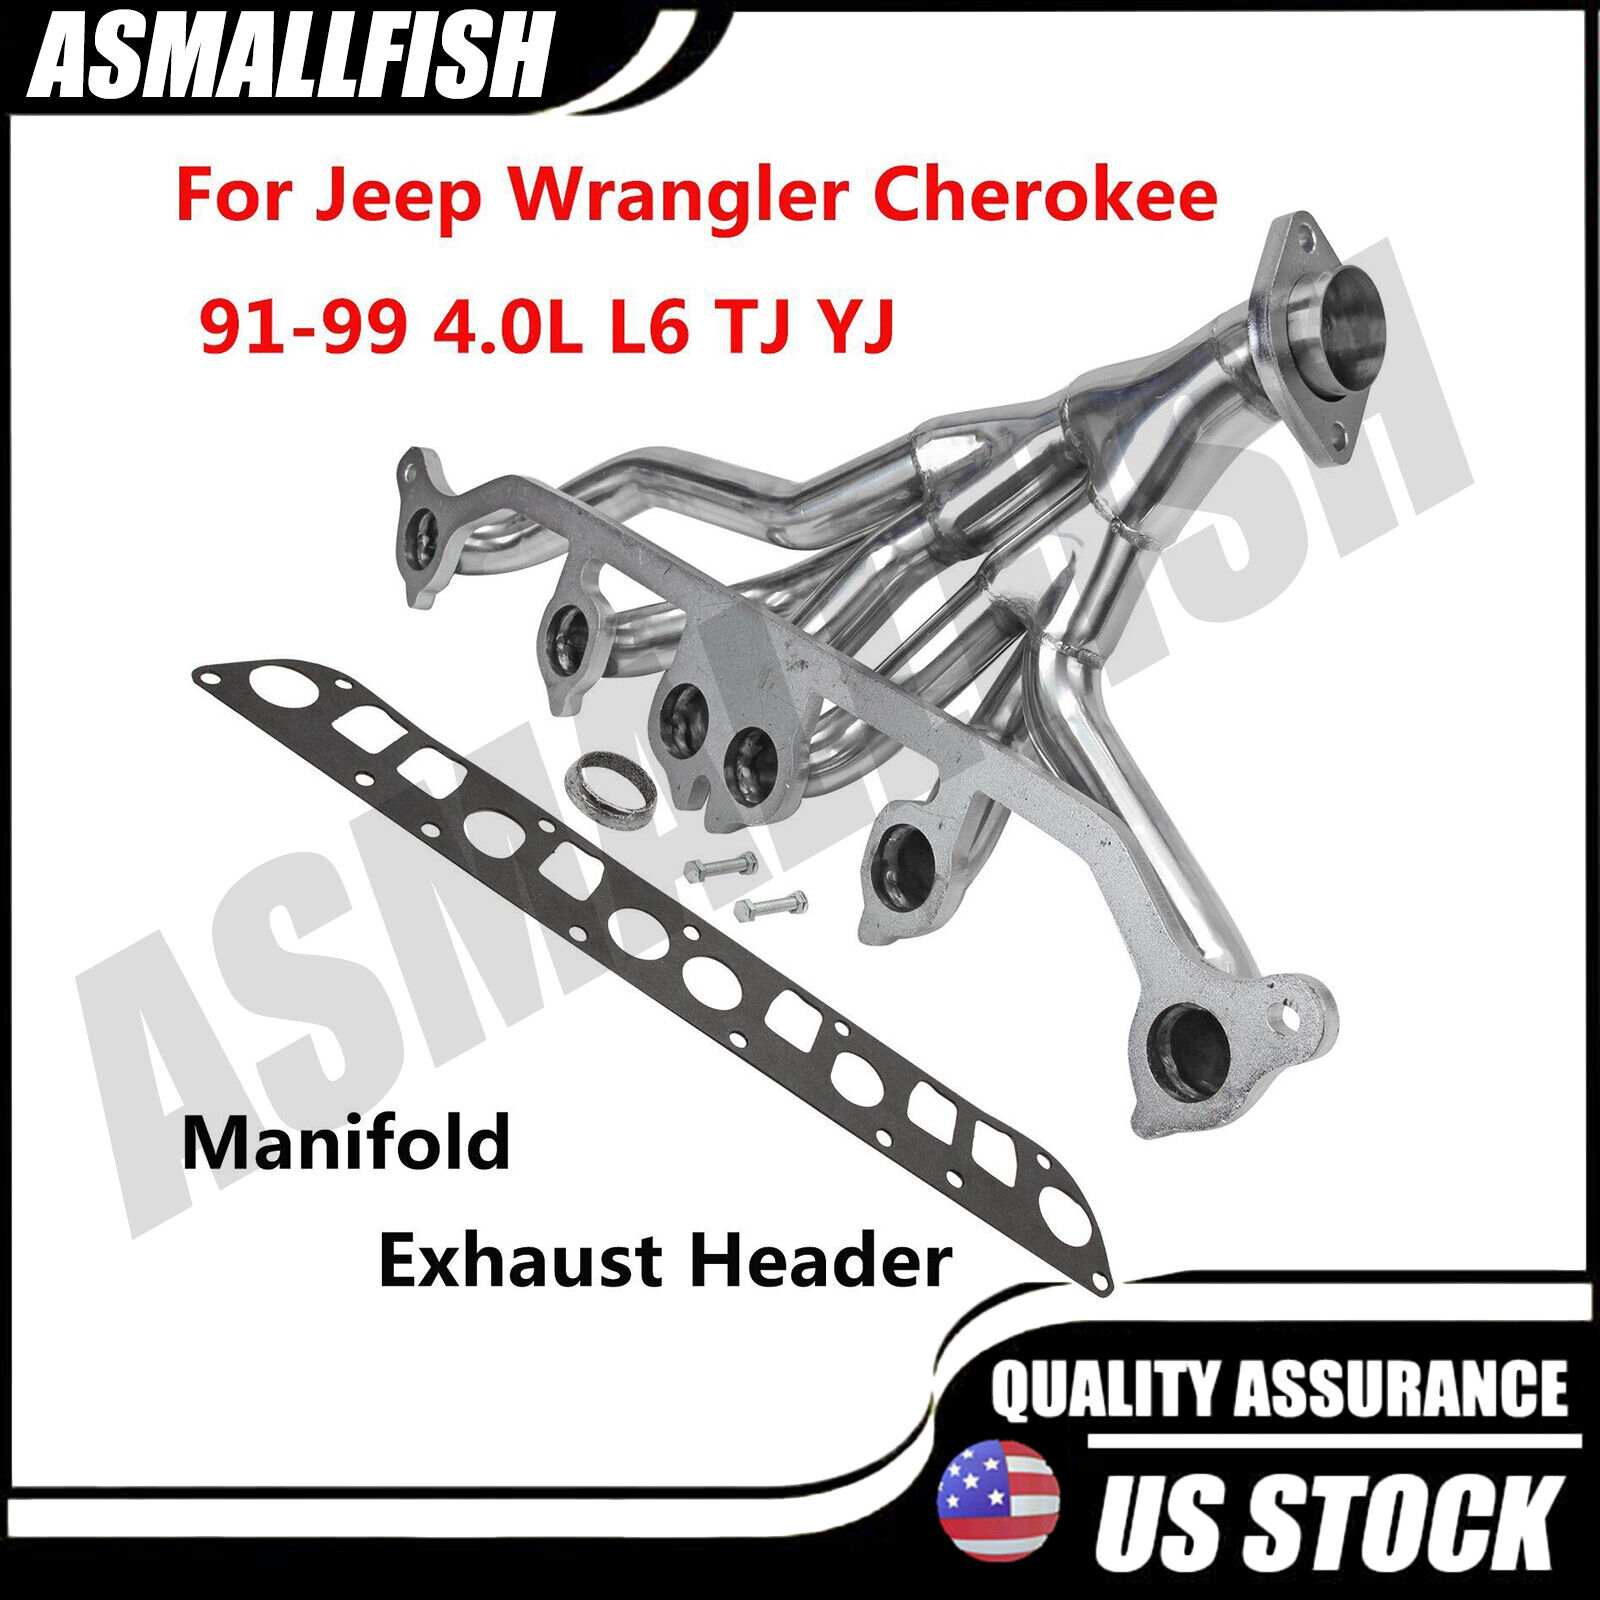 Stainless Exhaust Manifold Header for 91-99 Jeep Wrangler Cherokee 4.0L L6 TJ YJ